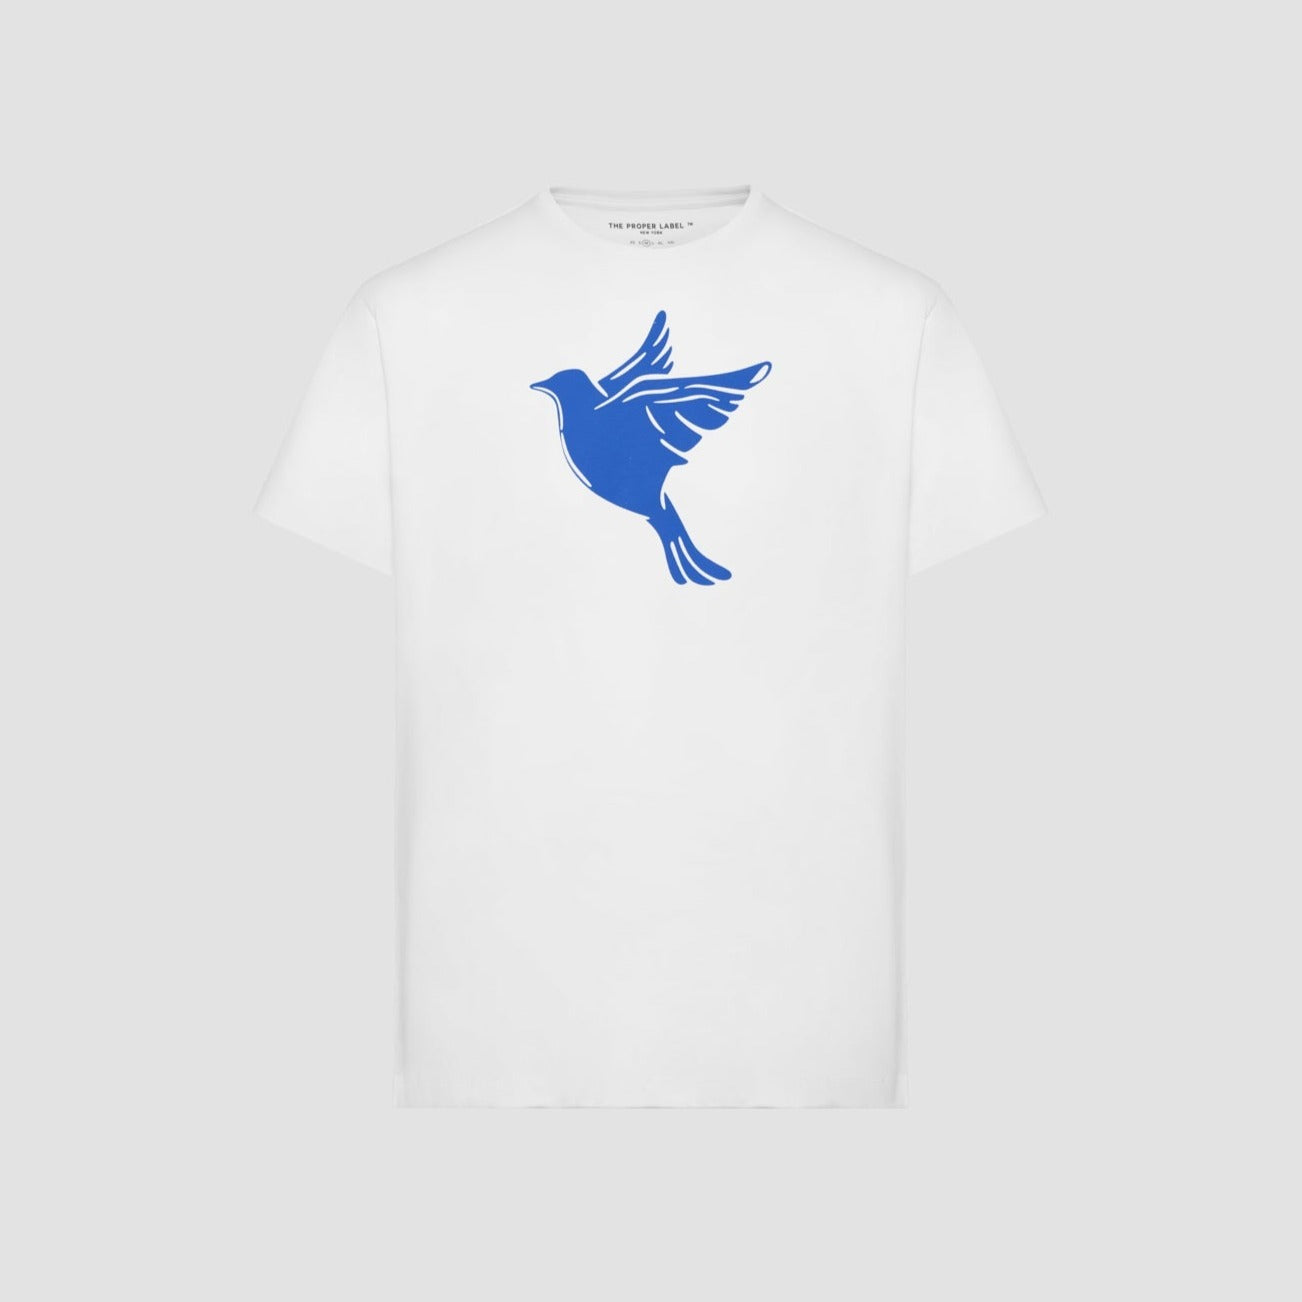 BY TPL ® Tee Shirt White [Large Blue Dove] - The Proper Label ™